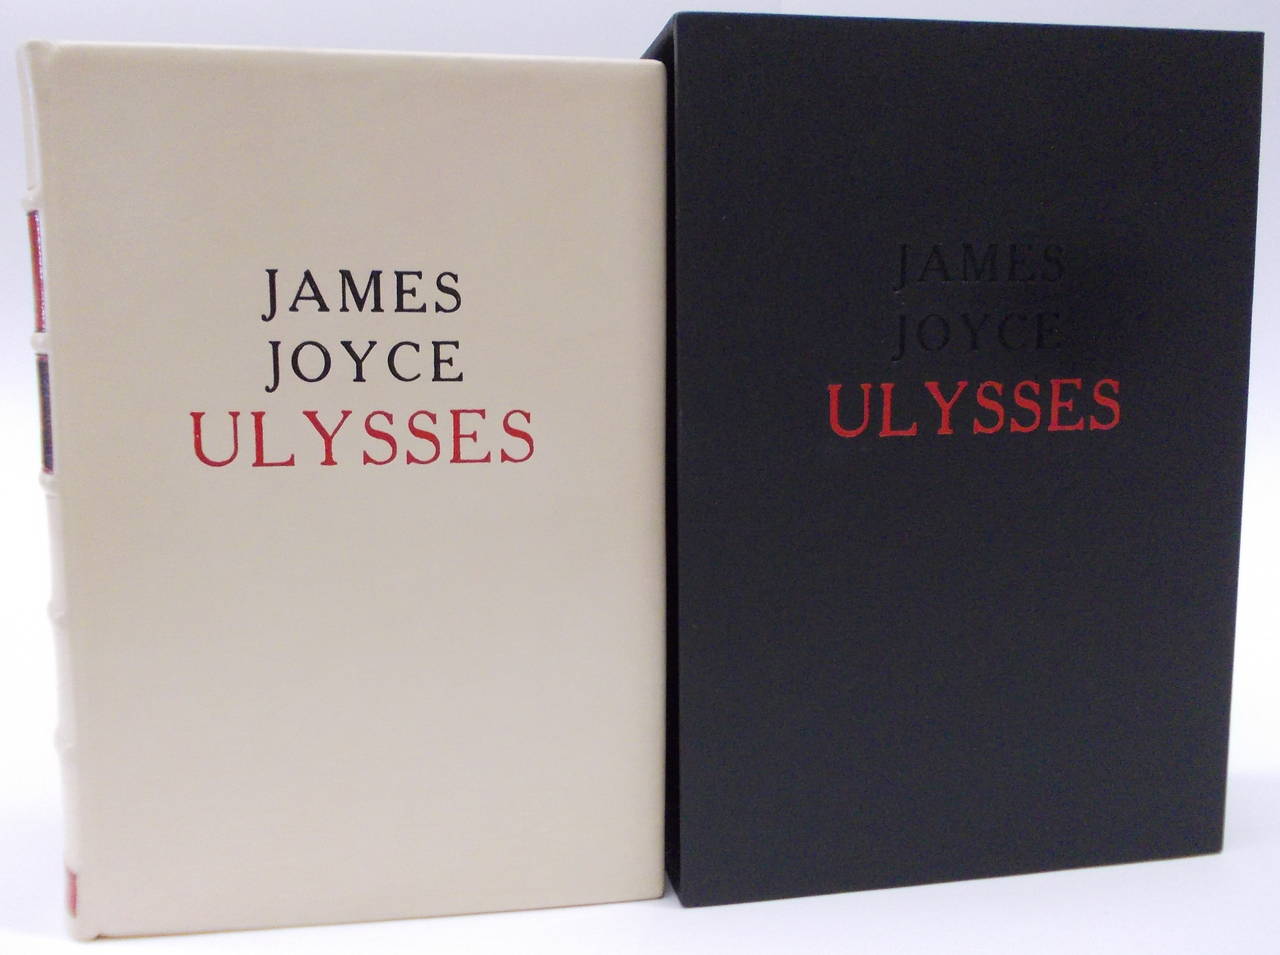 There have been at least 18 editions and variations in different impressions of each edition, though some are certainly more notable than others. Harriet Weaver of the Egoist Press published the first “English edition” of Ulysses later in 1922.